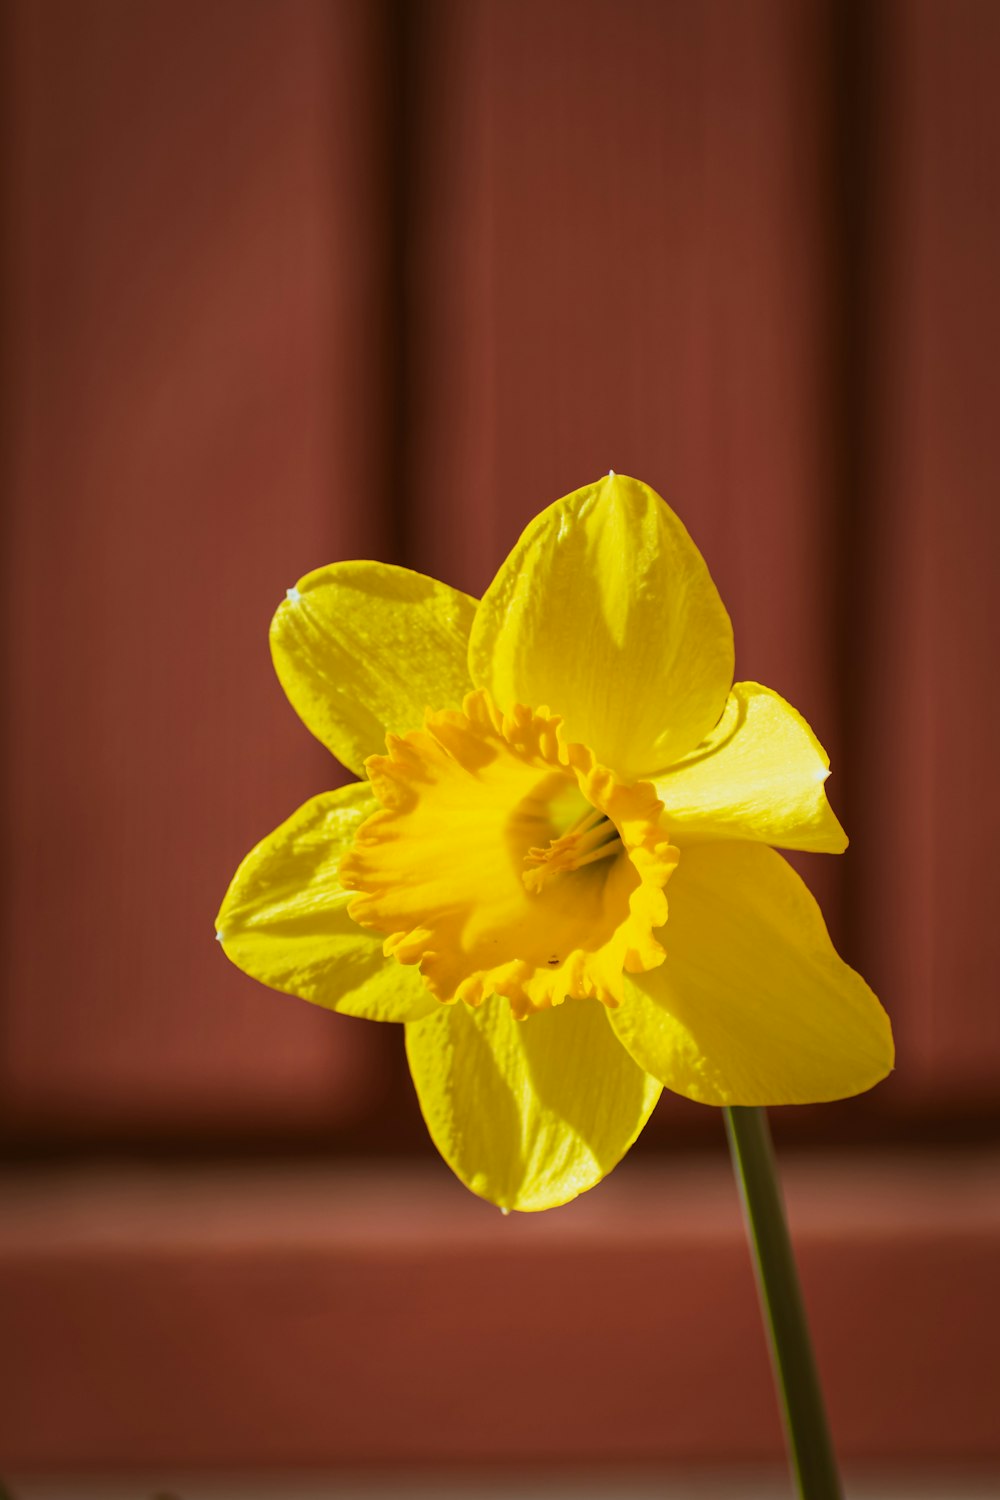 a single yellow flower is in a vase